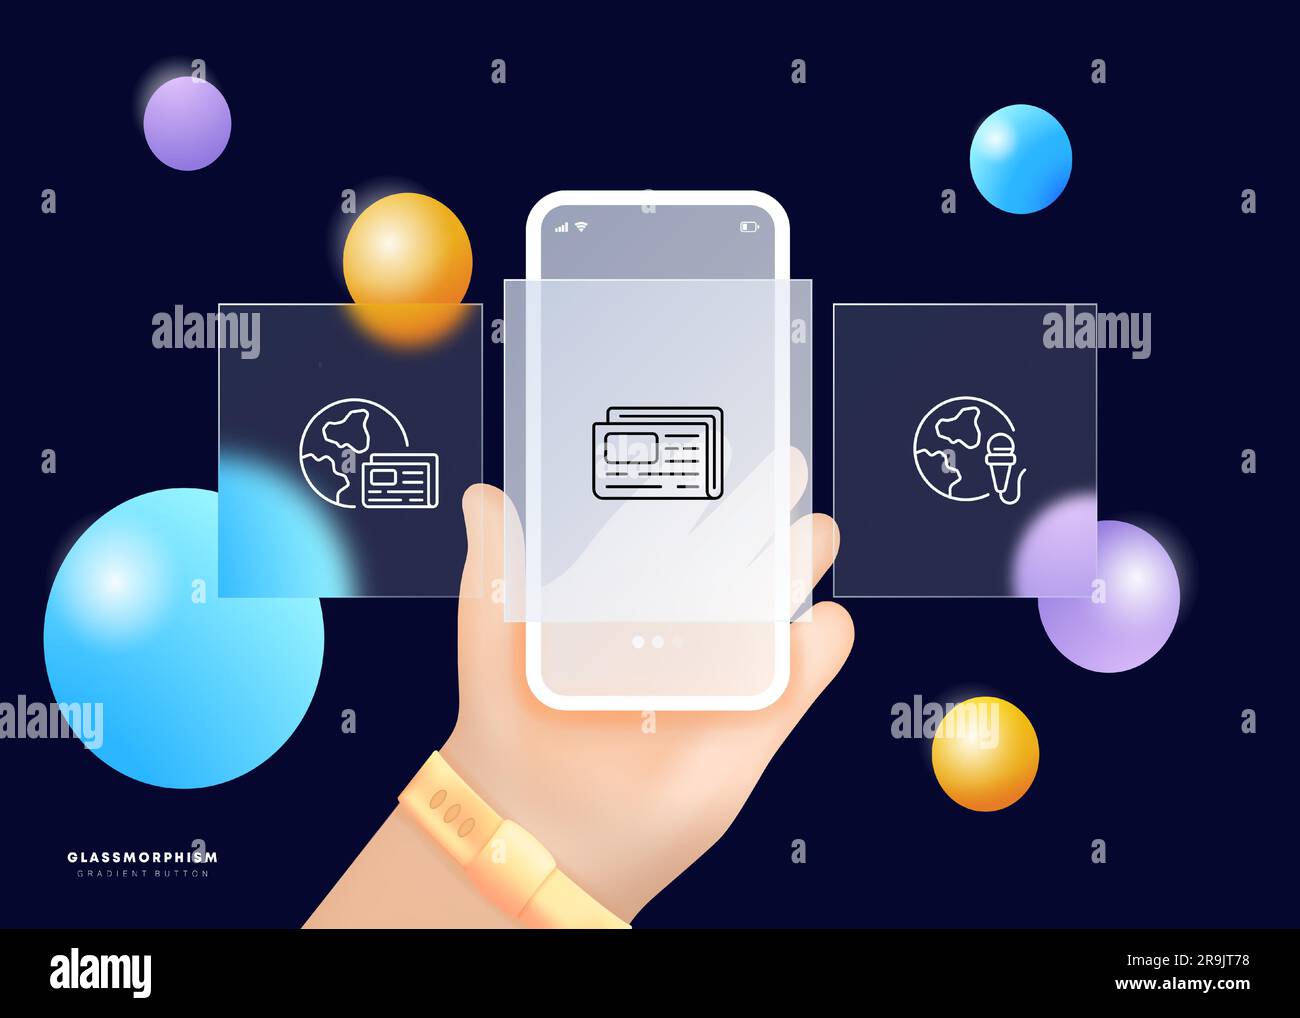 News Icon. Current events, latest updates, breaking news, journalism, news reporting, news media. Glassmorphism. UI phone app screen Vector icon Stock Vector